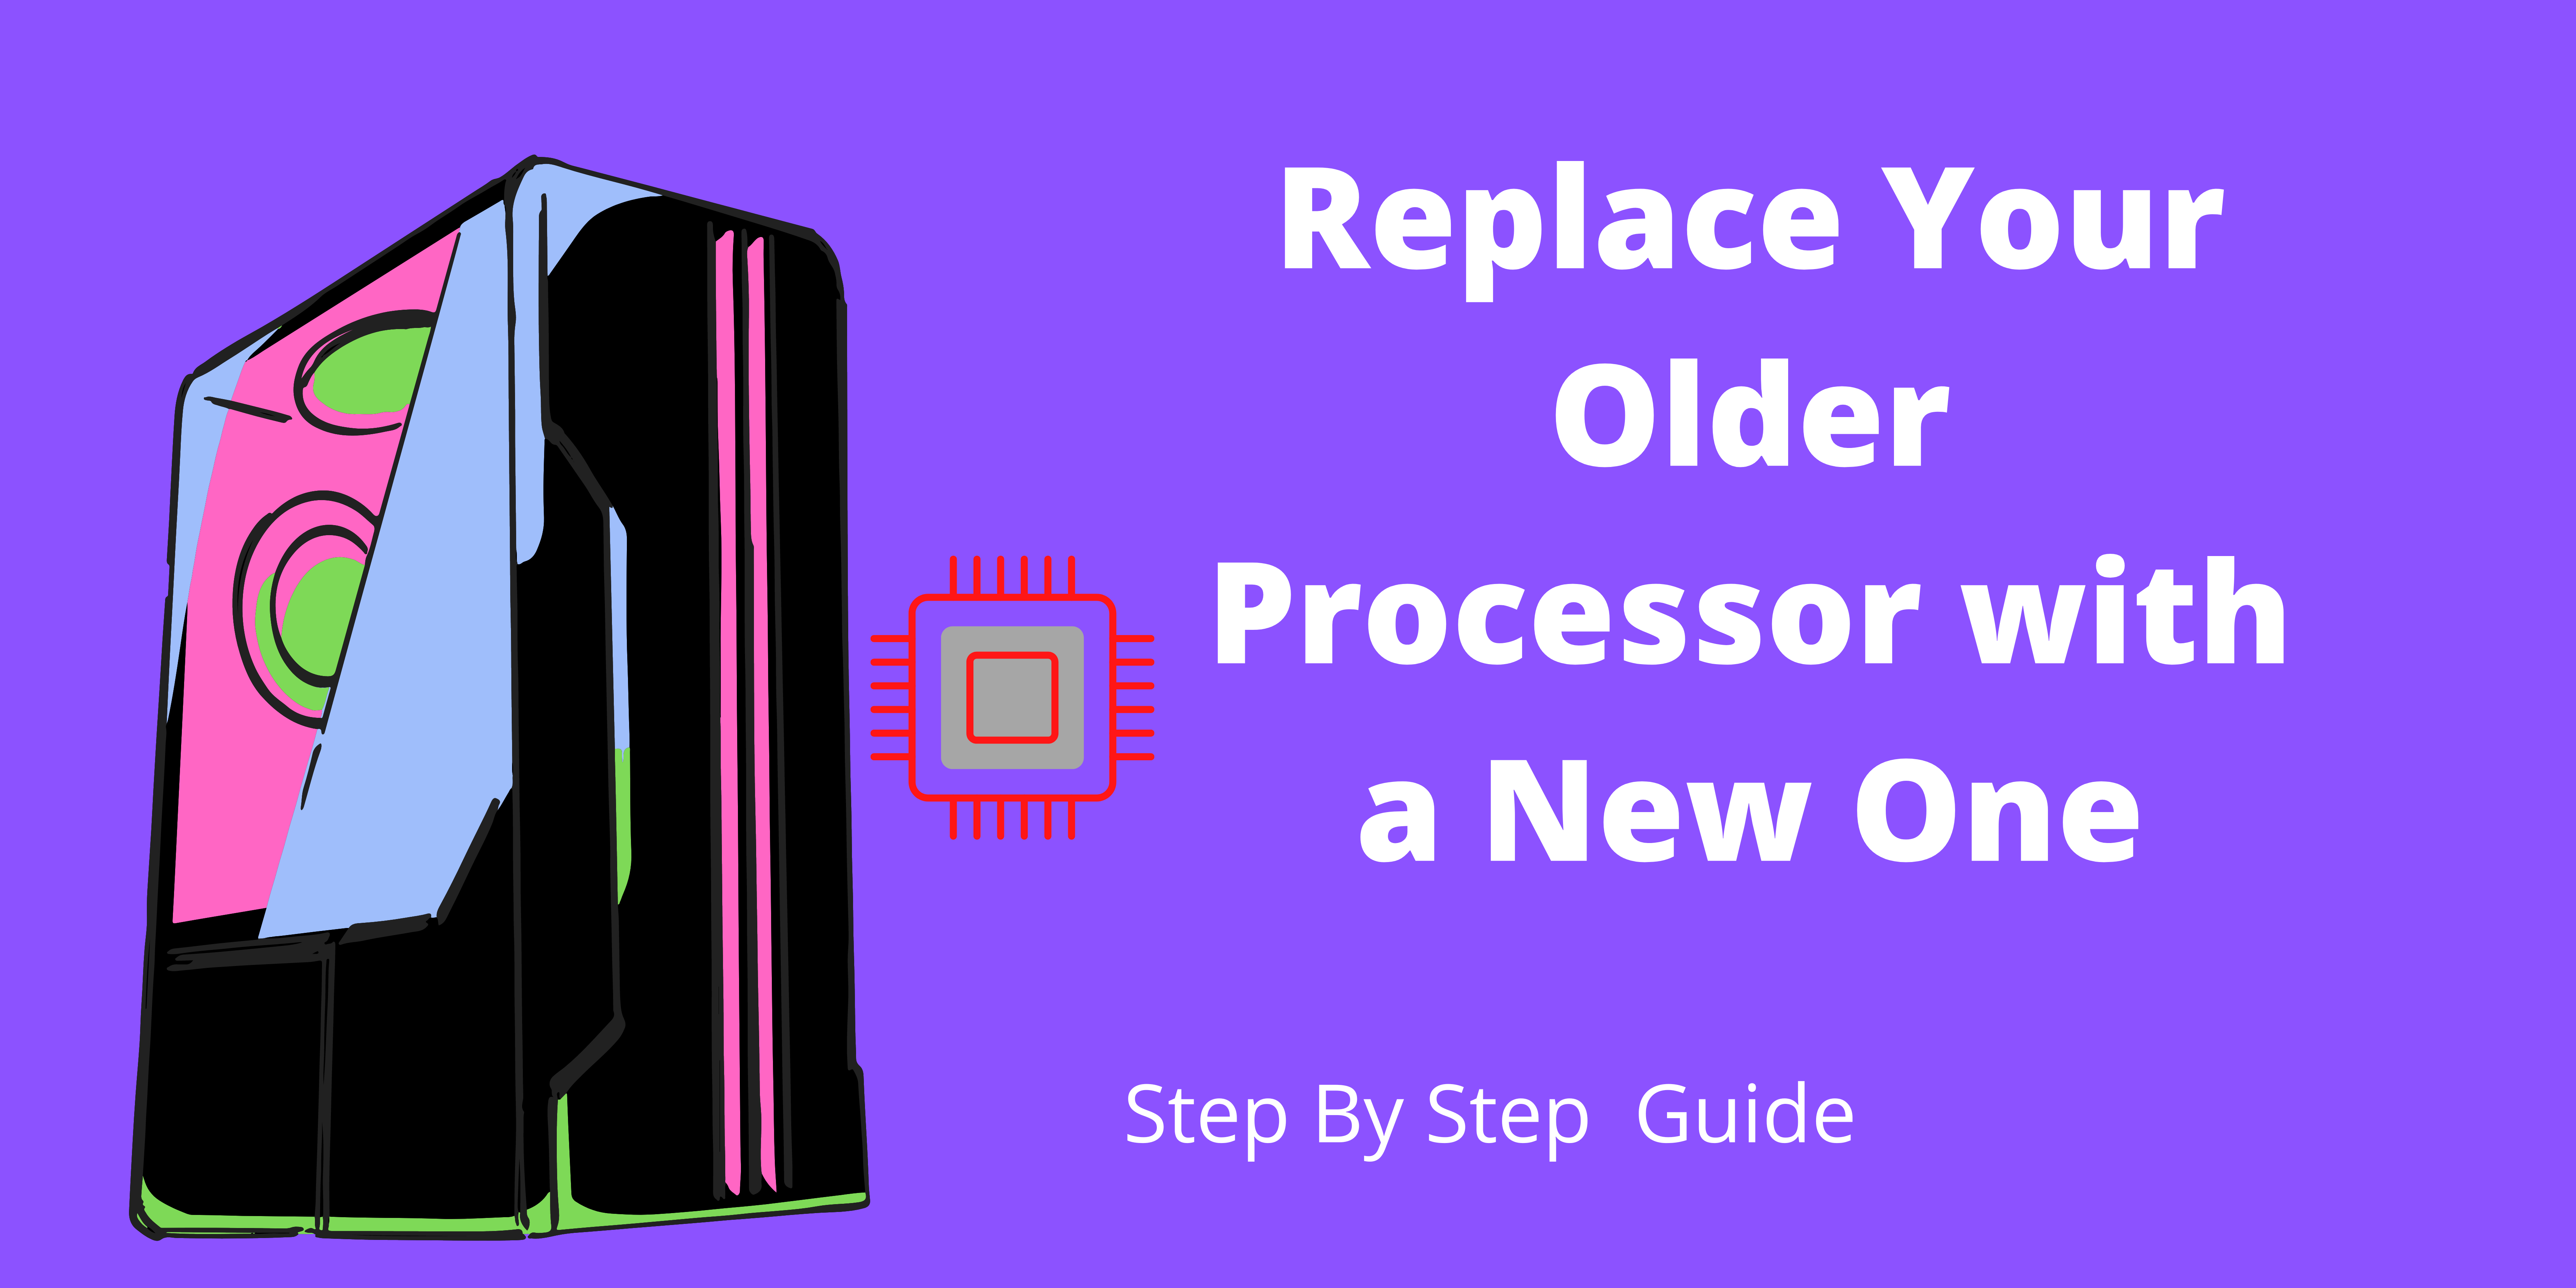 Replace The Old Processor-Step By Step Guide